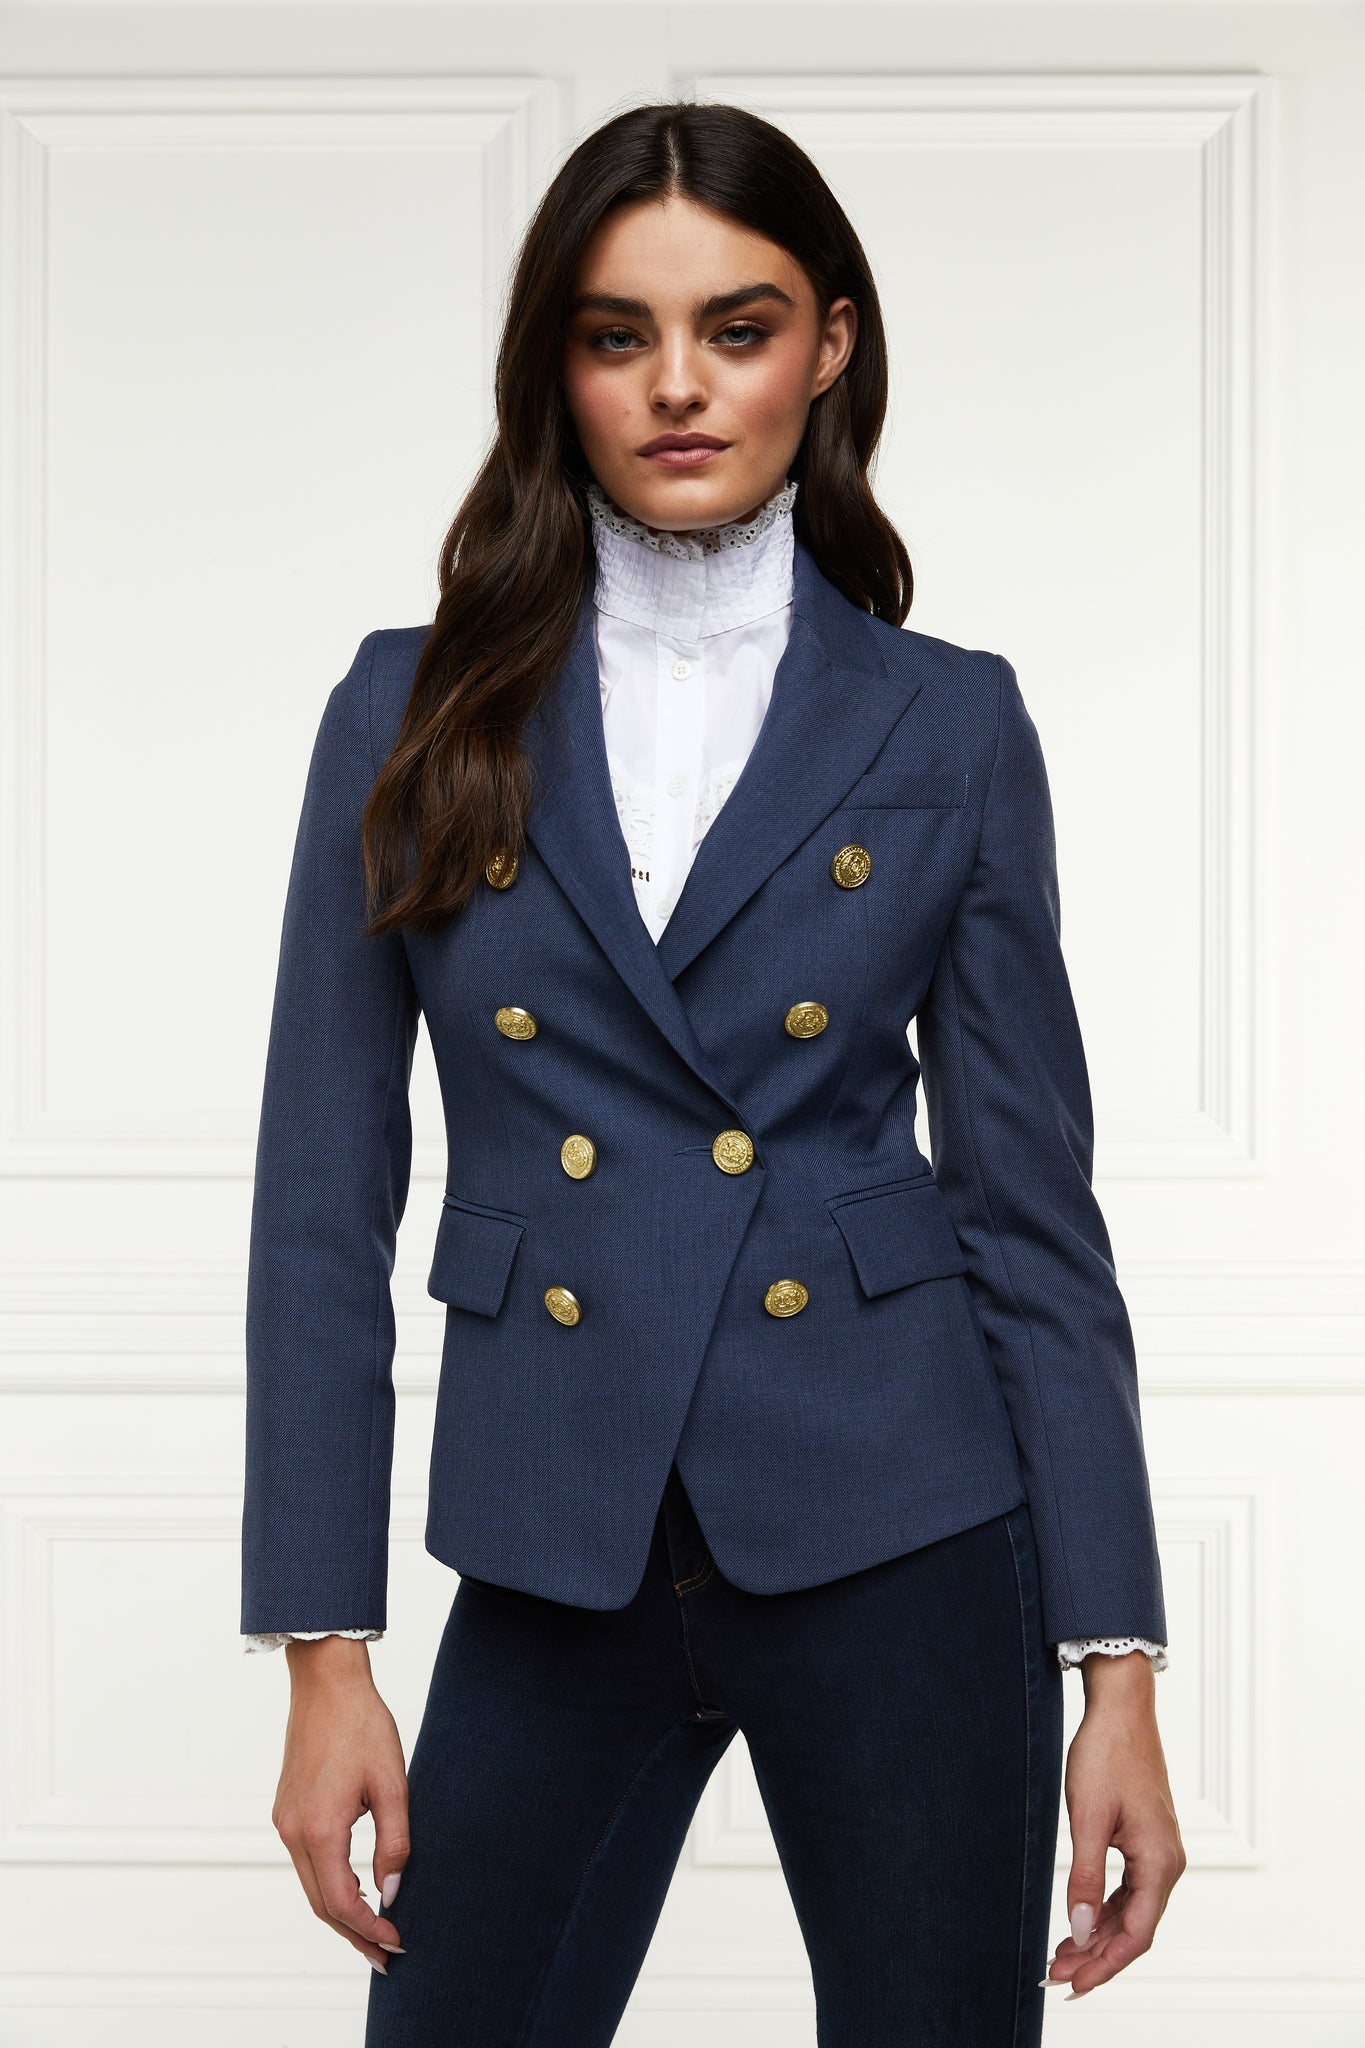 British made double breasted blazer that fastens with a single button hole to create a more form fitting silhouette with two pockets and gold button detailing this blazer in denim 